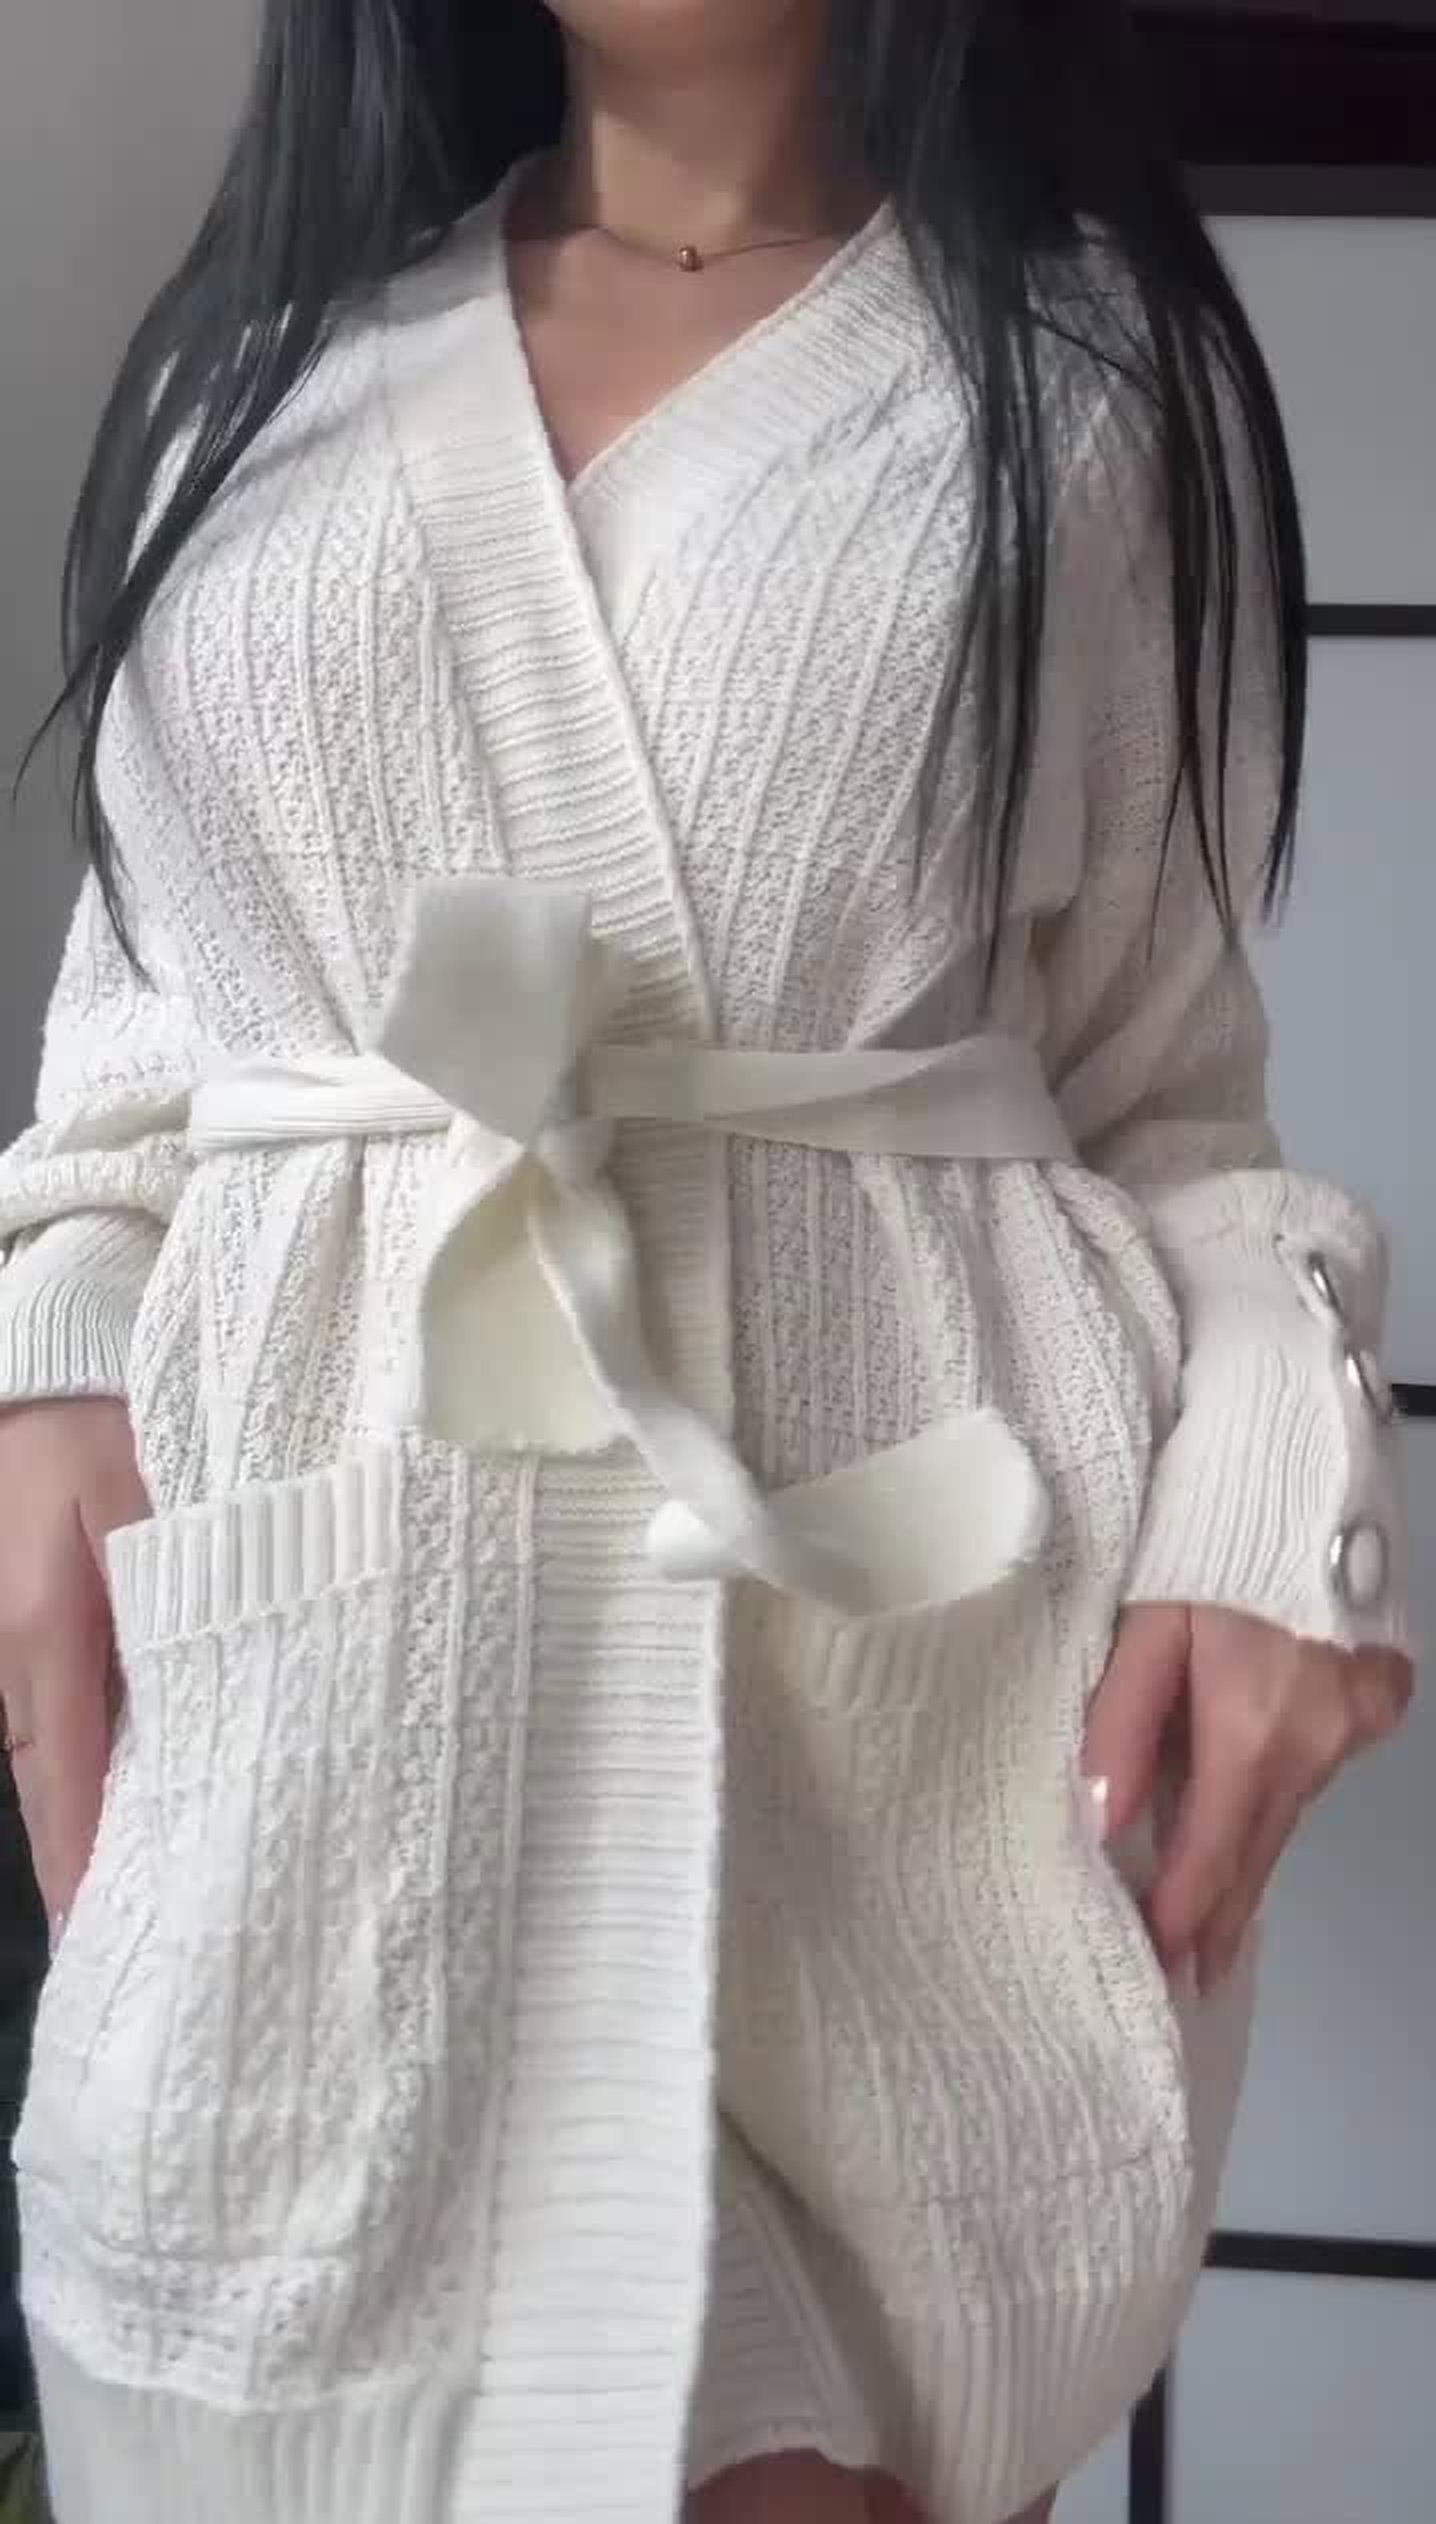 Video post by PerfectBoobs